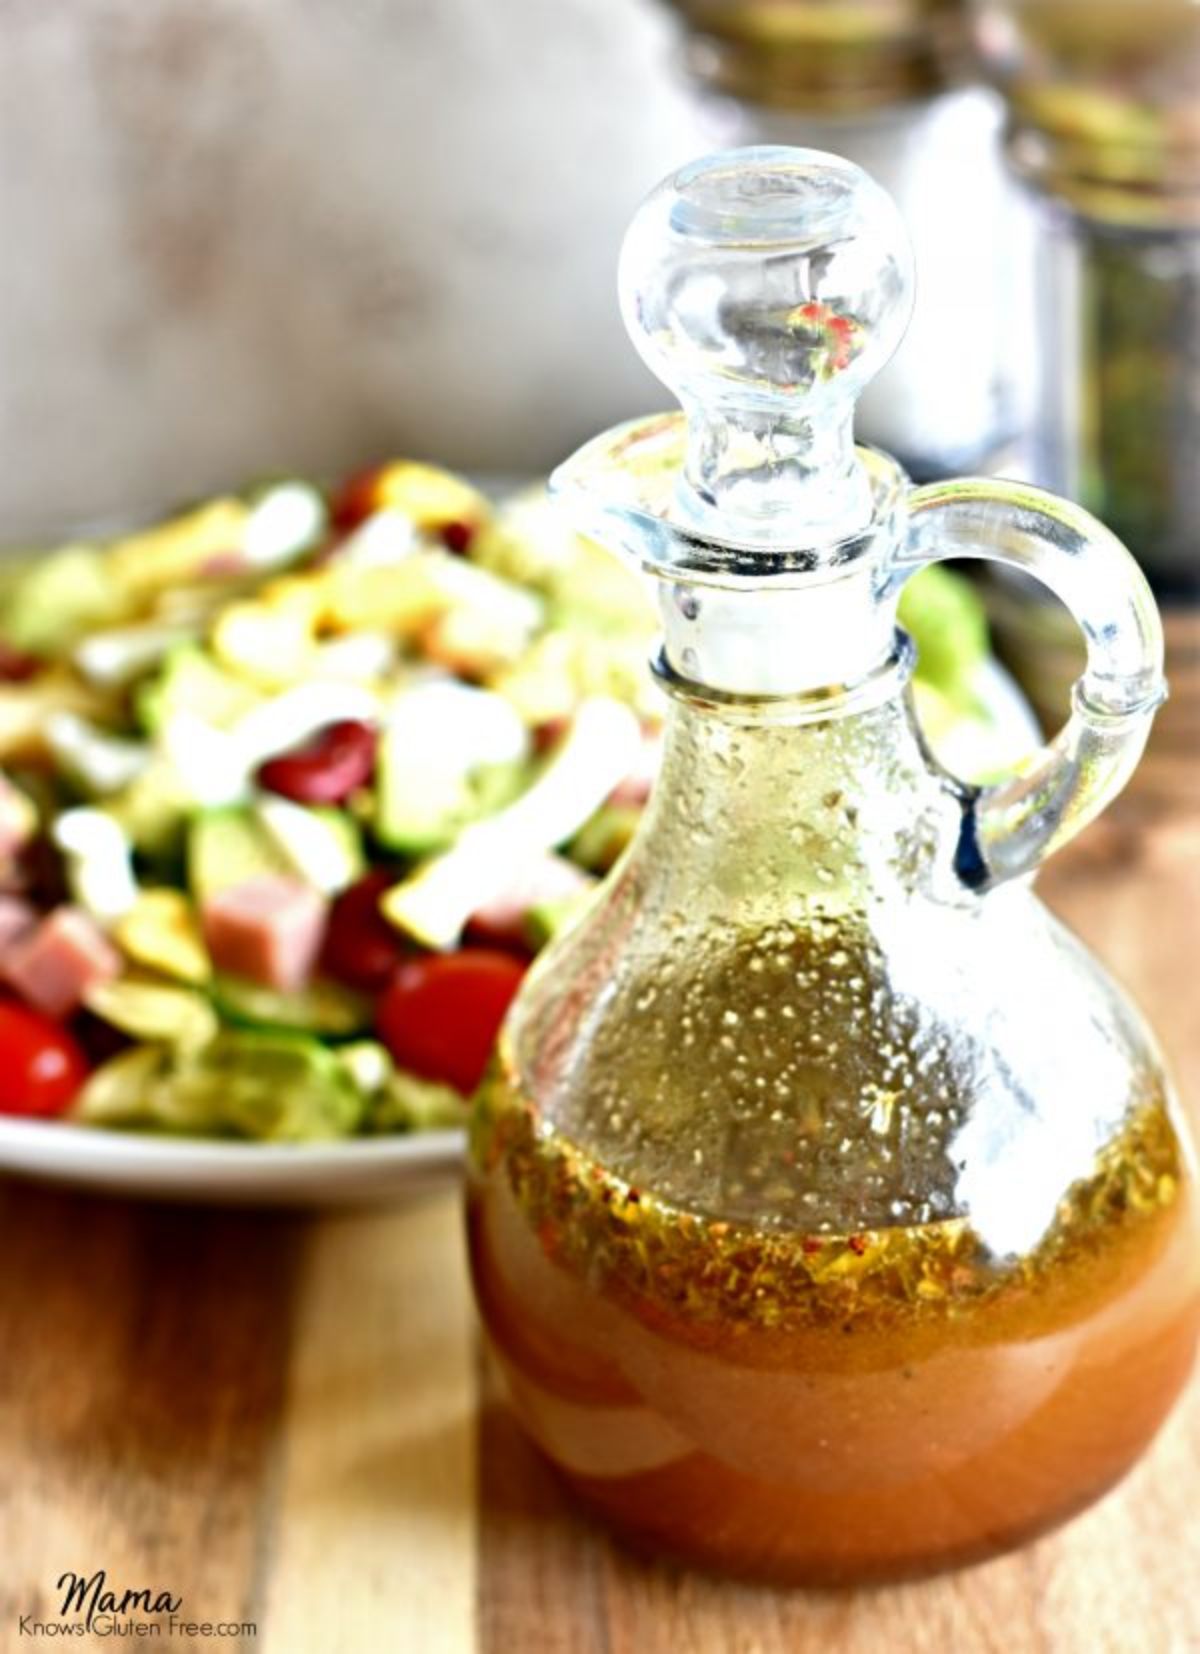 A glass jug with stopper full of balsamic vinaigrette with a plate of salad behind it